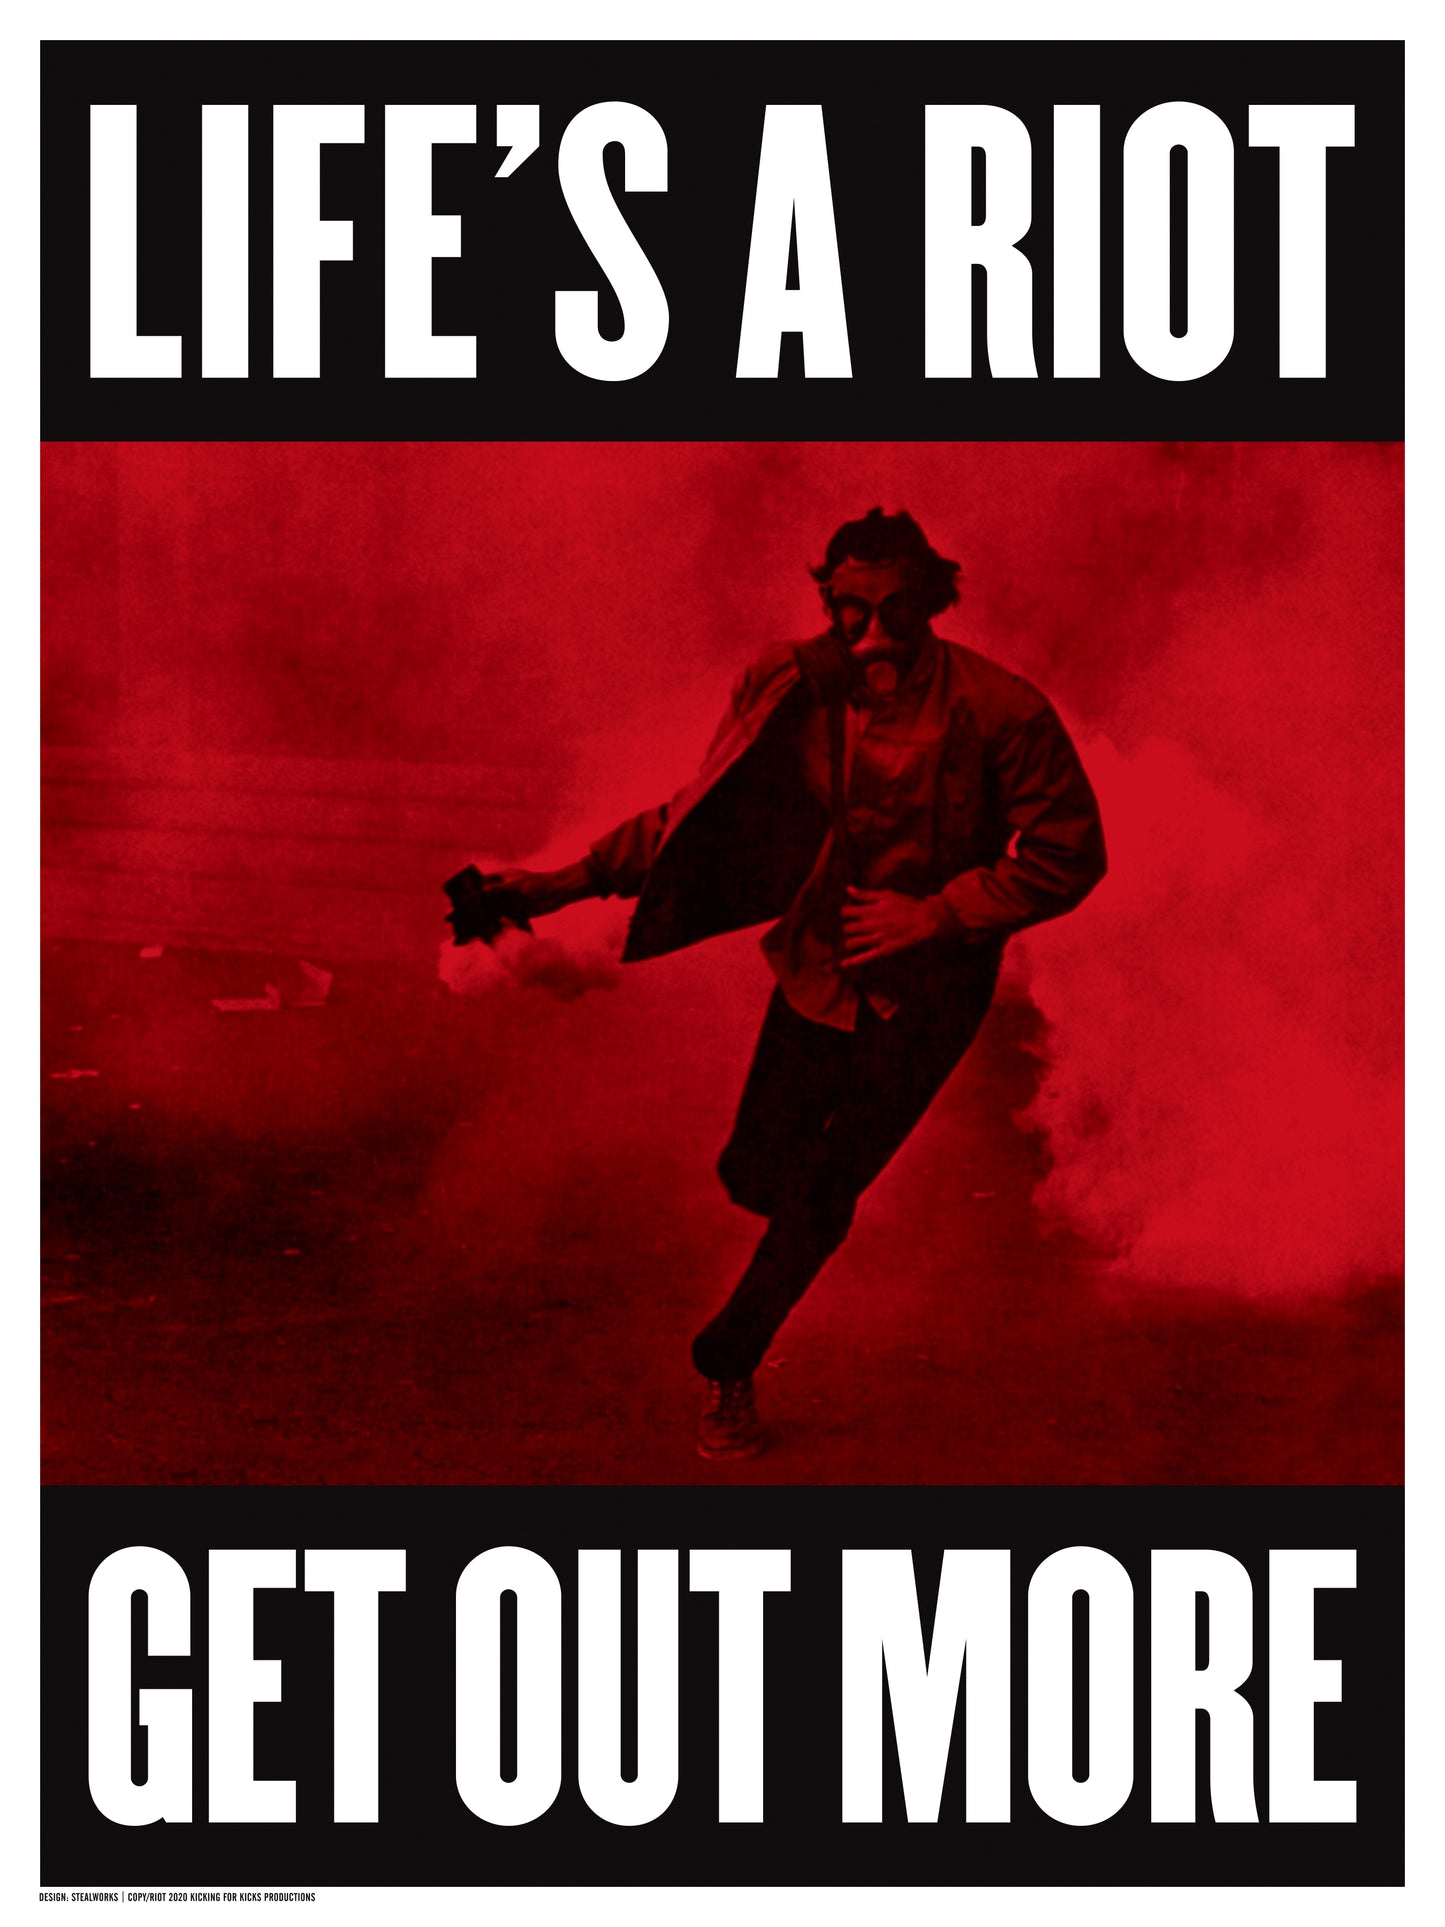 Stealworks "Life's A Riot" Benefit Art Print (2020)